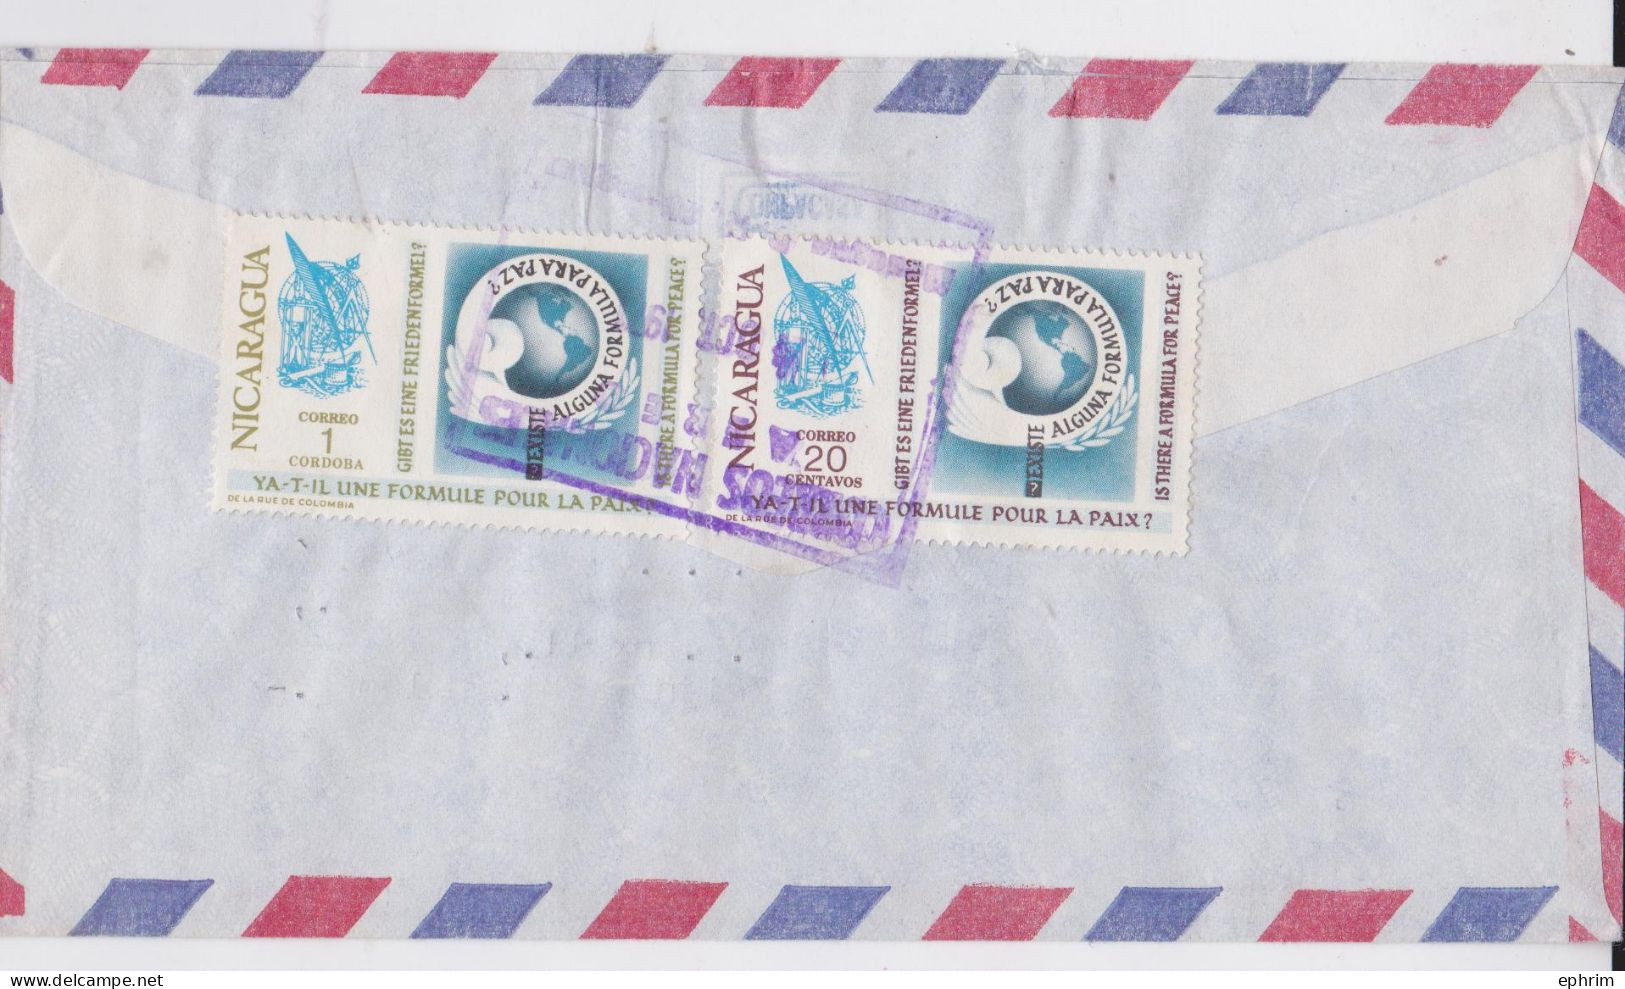 Nicaragua Managua Lettre Timbre Mathématiques Stamp X2 Air Mail Cover Sello Correo Aereo - Nicaragua